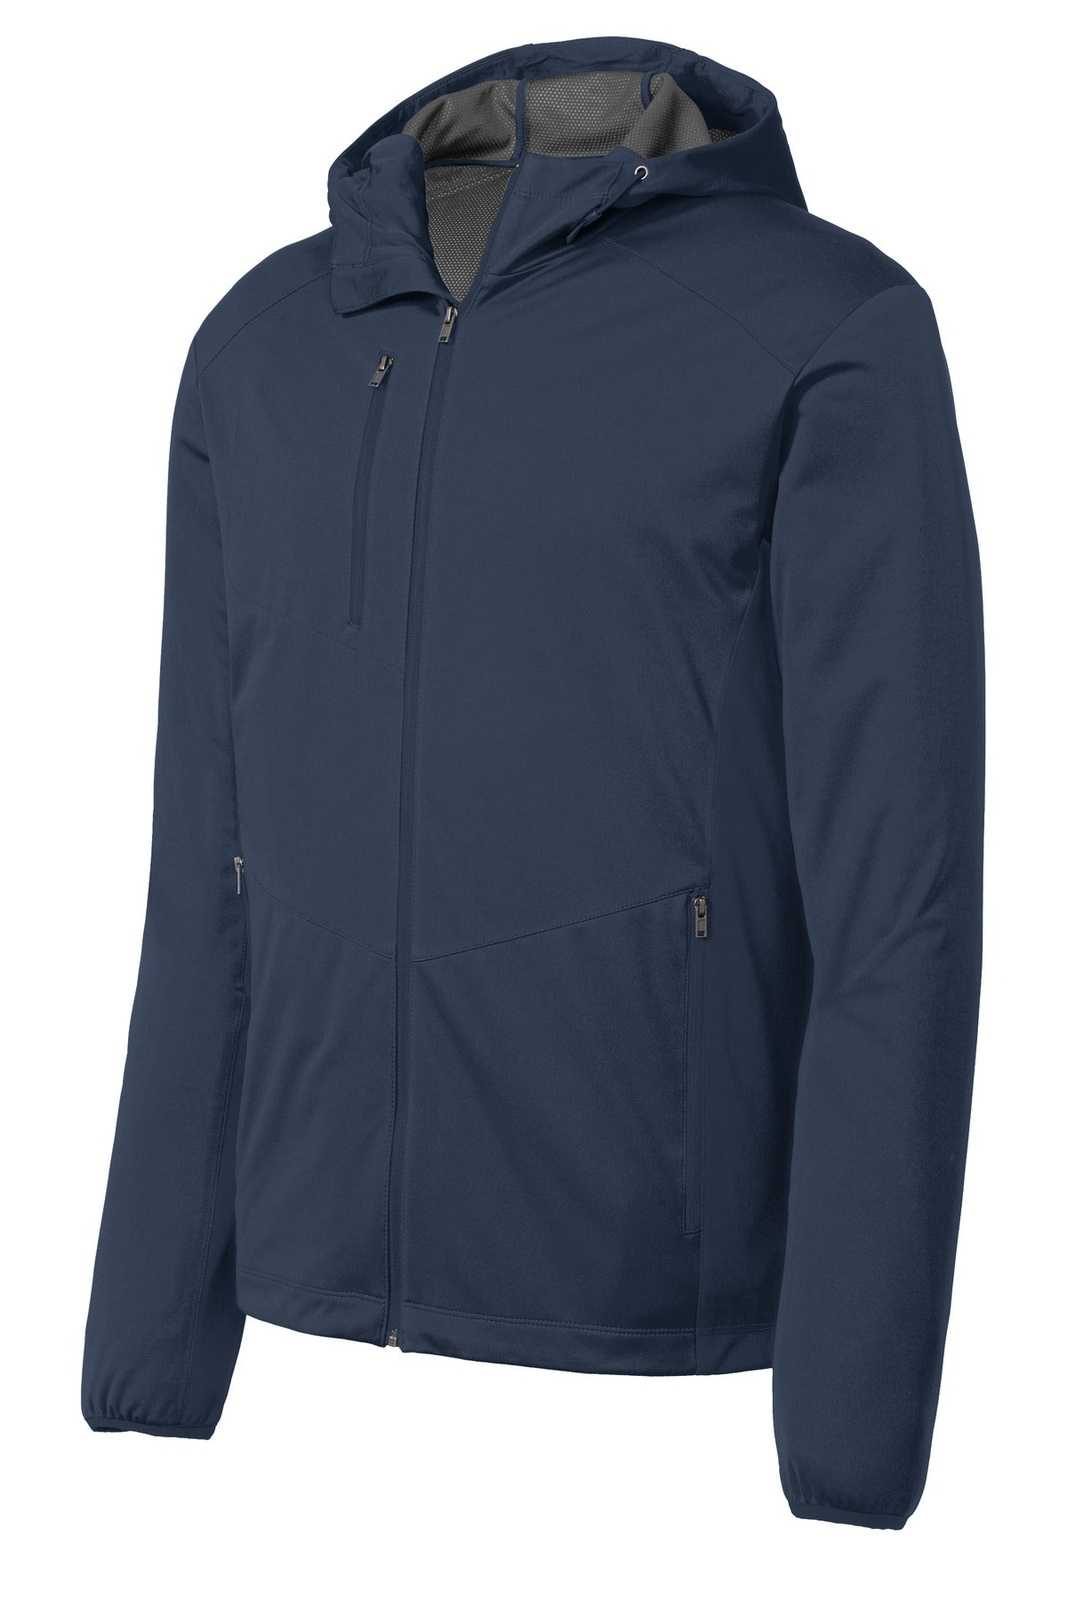 Port Authority J719 Active Hooded Soft Shell Jacket - Dress Blue Navy - HIT a Double - 5